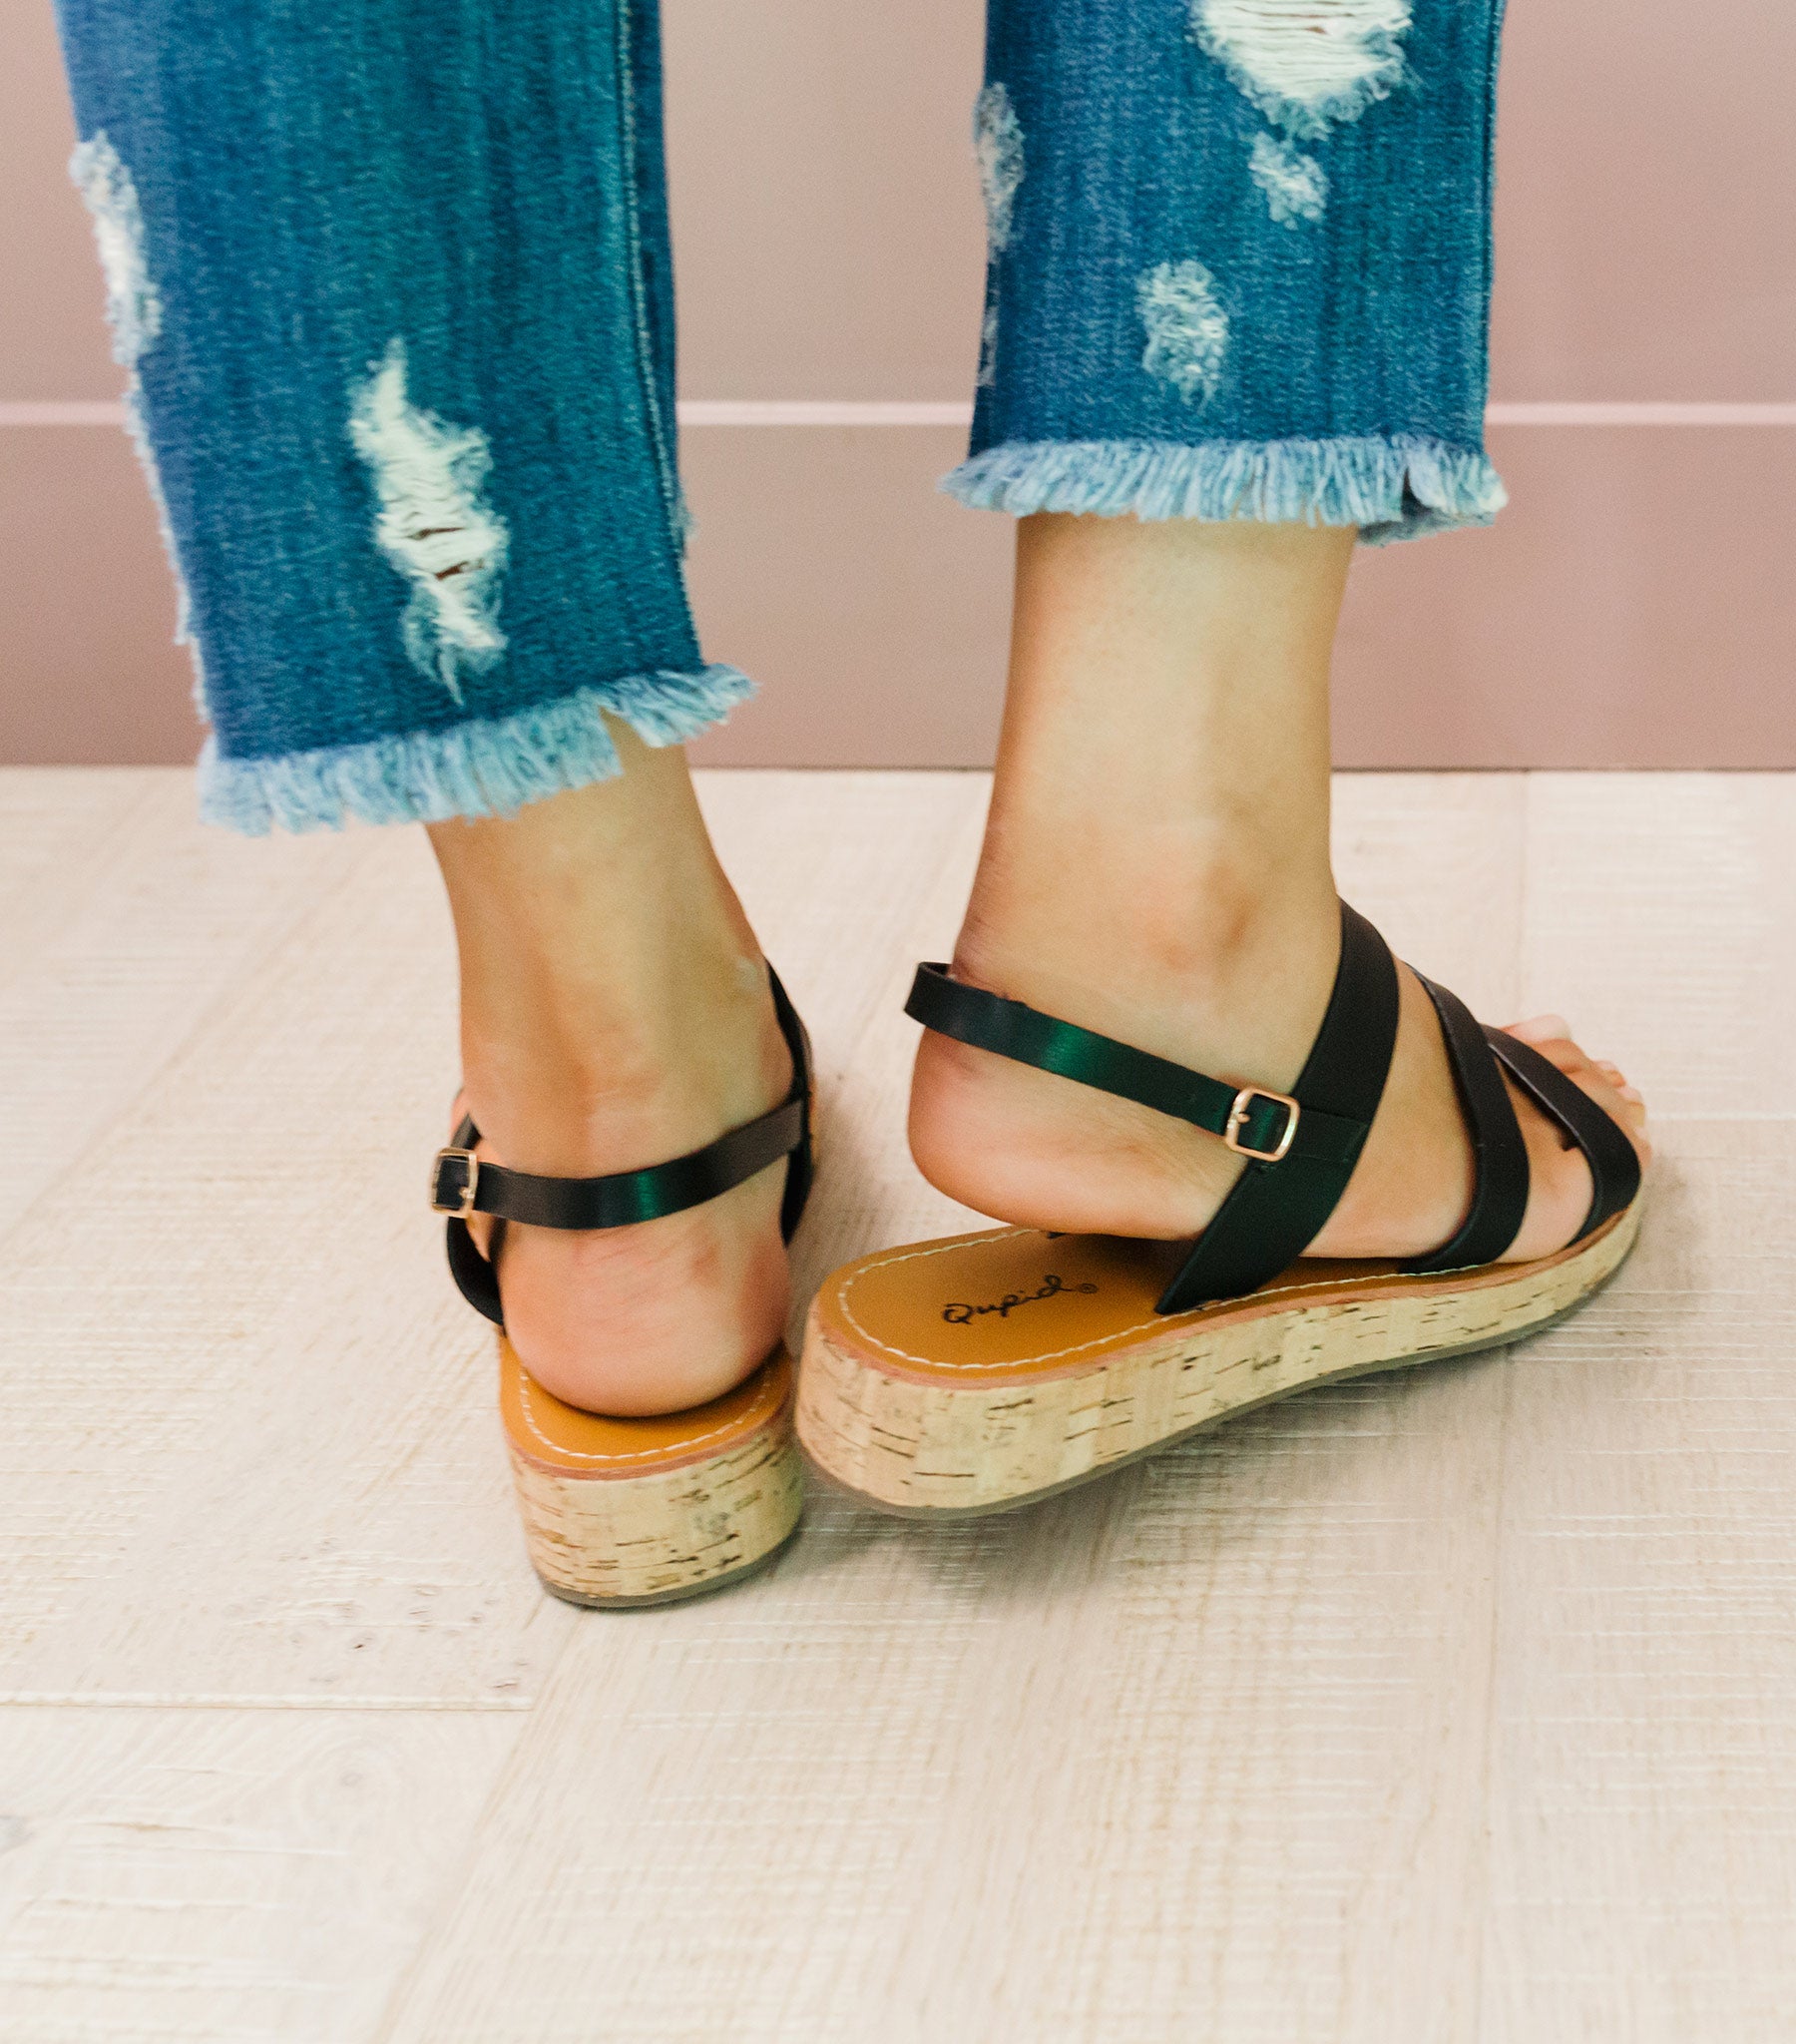 Boho Chic Style Shoes At Affordable Prices | Hope Ave - Hope Ave Boutique